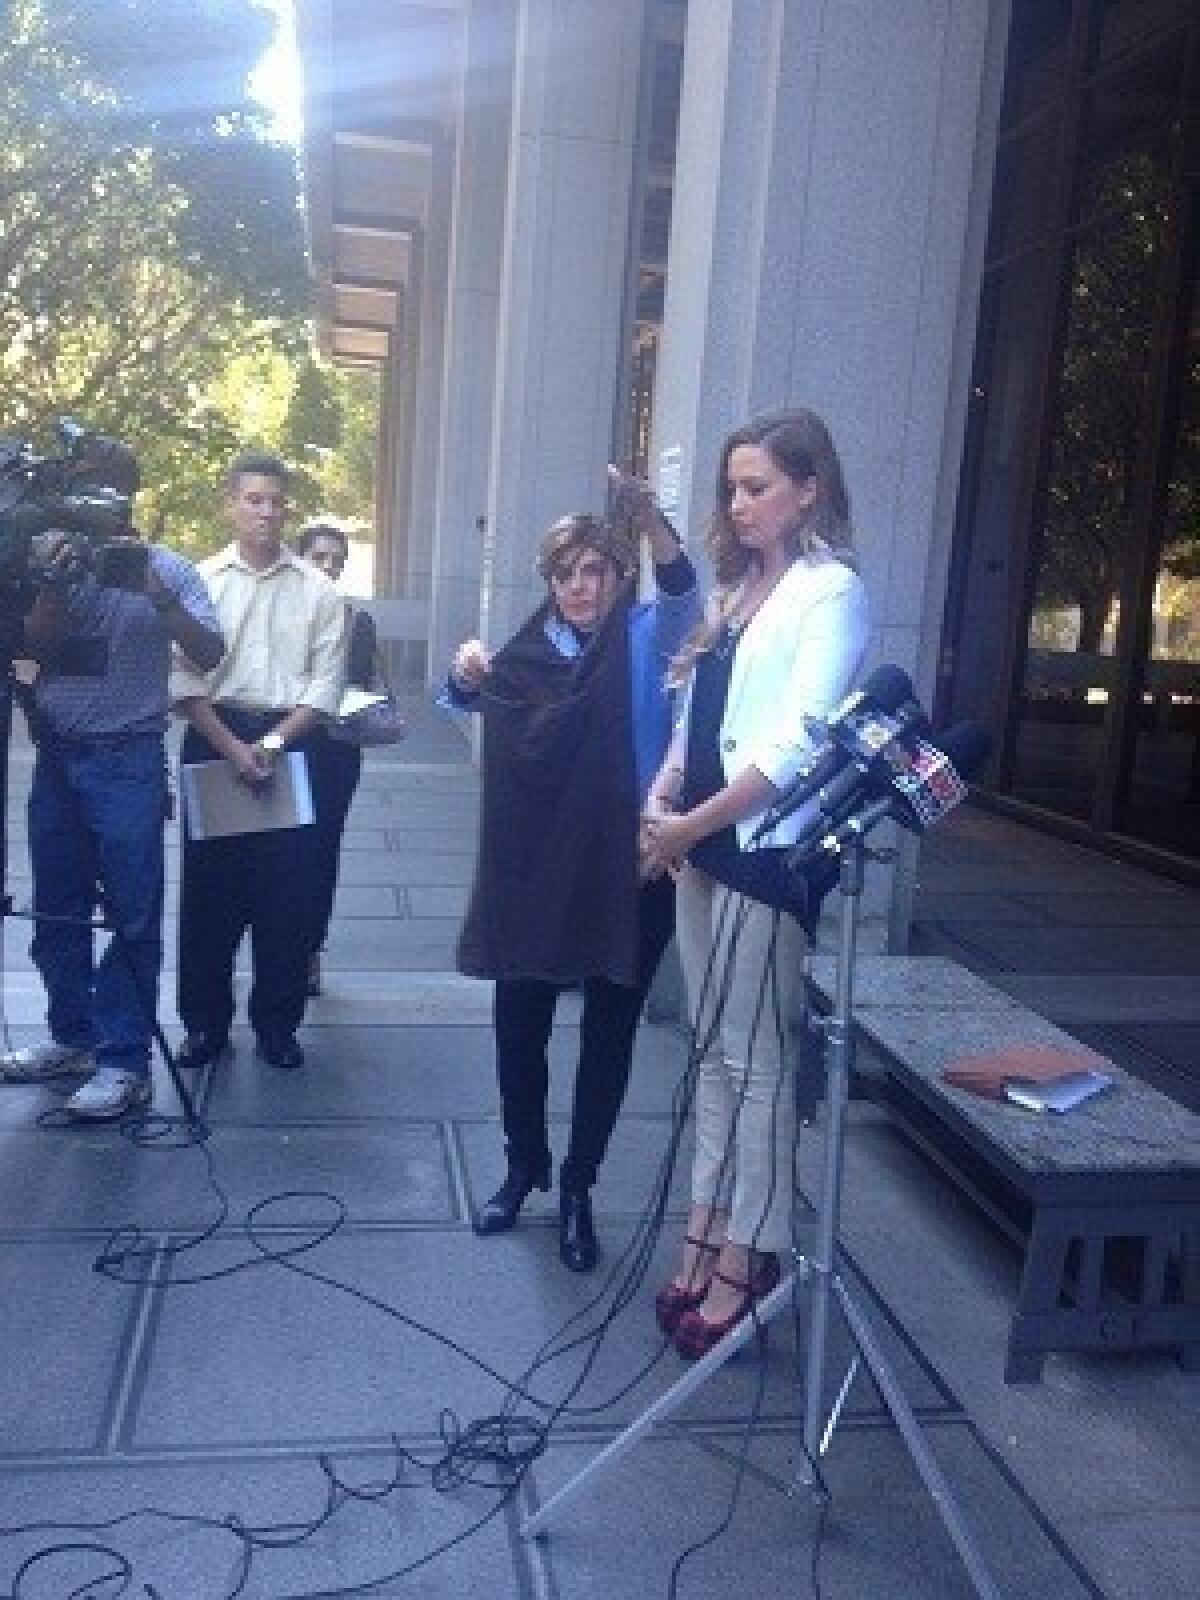 Model Brittanie Weaver, right, with attorney Gloria Allred, who is holding up the dress Weaver was wearing when video was secretly taken up her dress at a pet store.